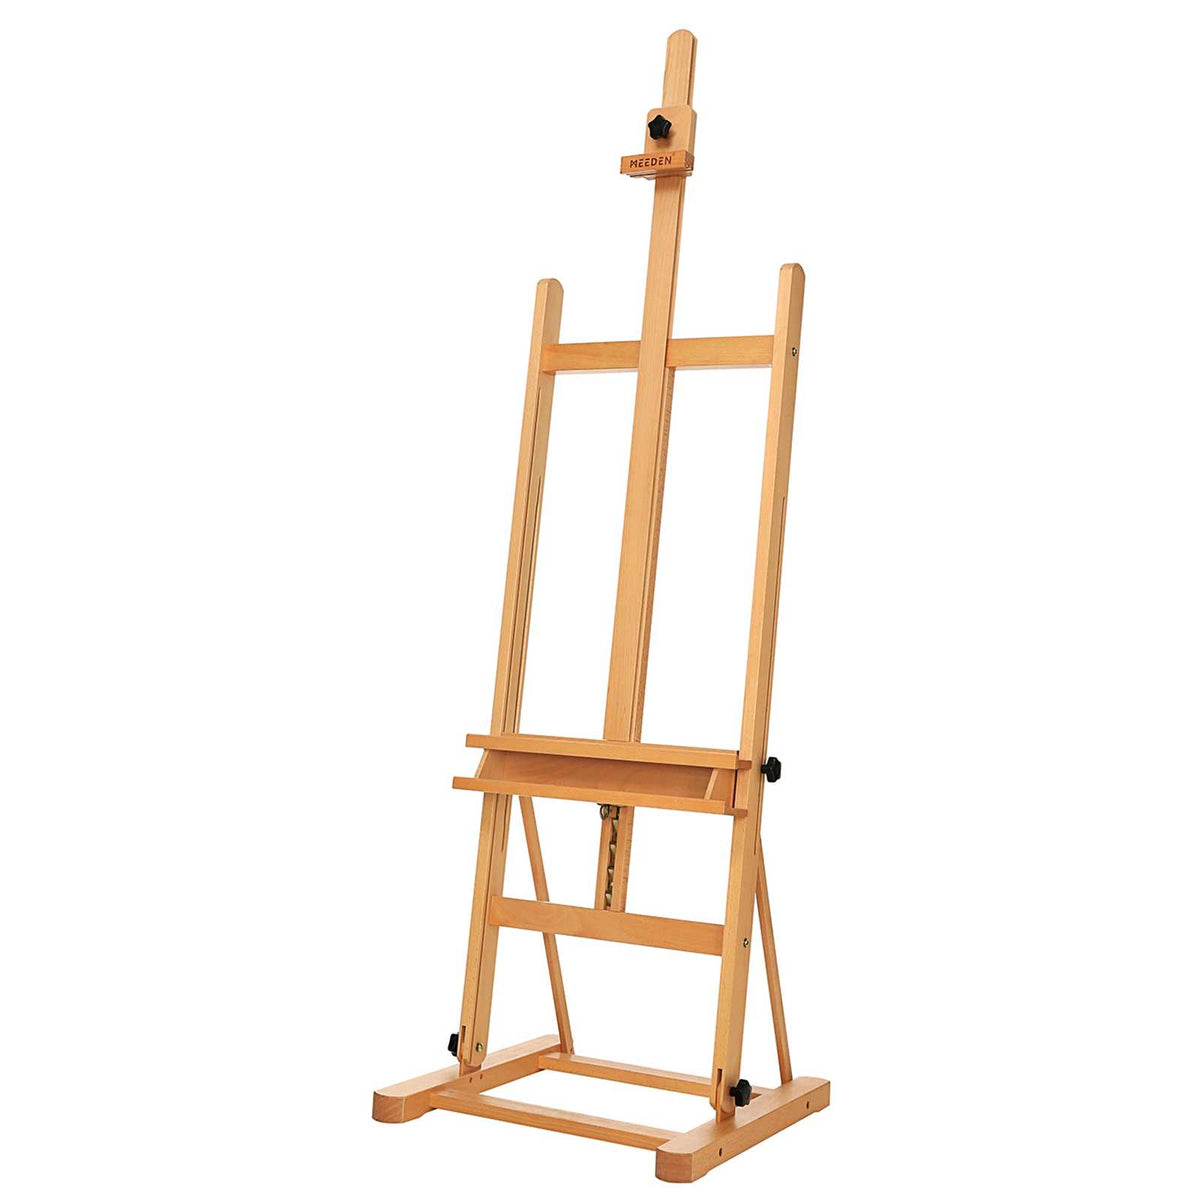 MEEDEN Artist Painting Easel 71 to 100H, Holds Canvas Up to 48, Art  Beech Wood Paint Easel Stand, Adjustable Studio H-Frame Floor Easel with